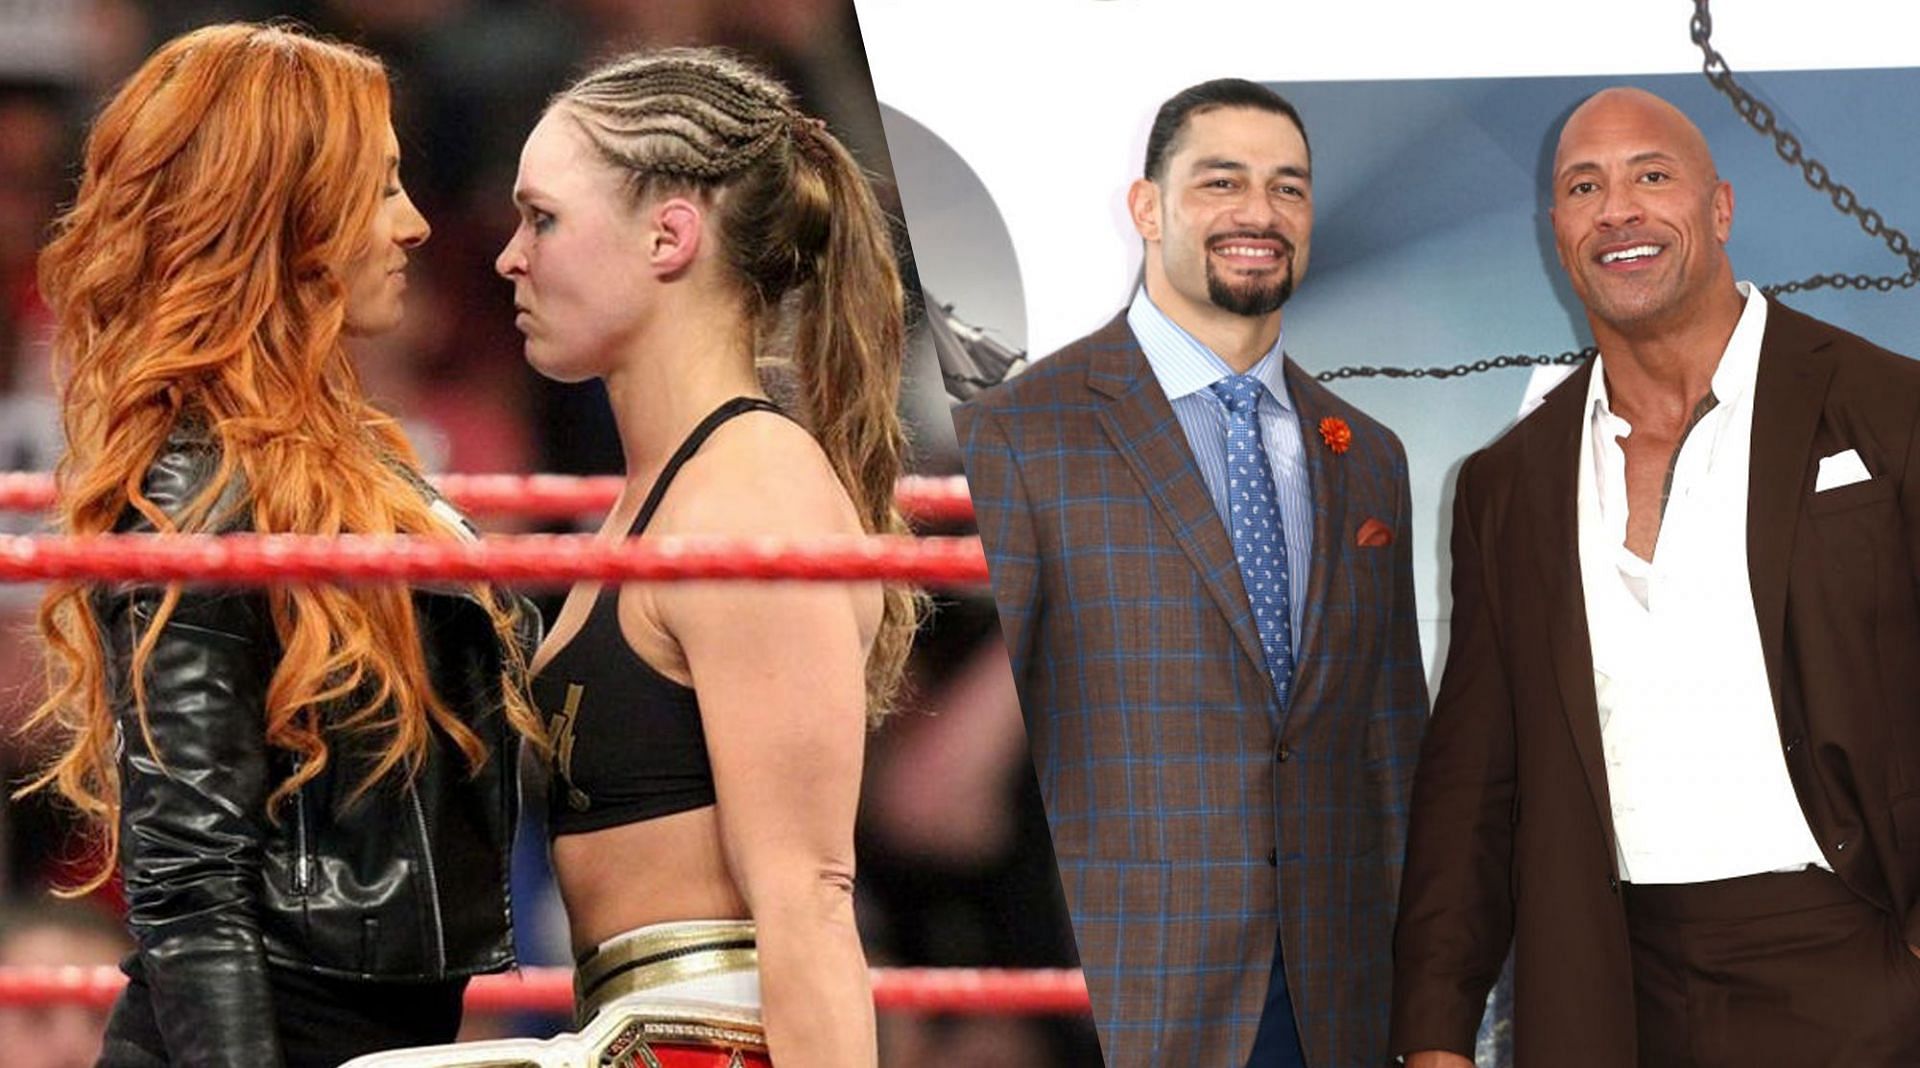 Becky Lynch vs. Ronda Rousey &amp; Roman Reigns vs. The Rock planned for WWE WrestleMania 39